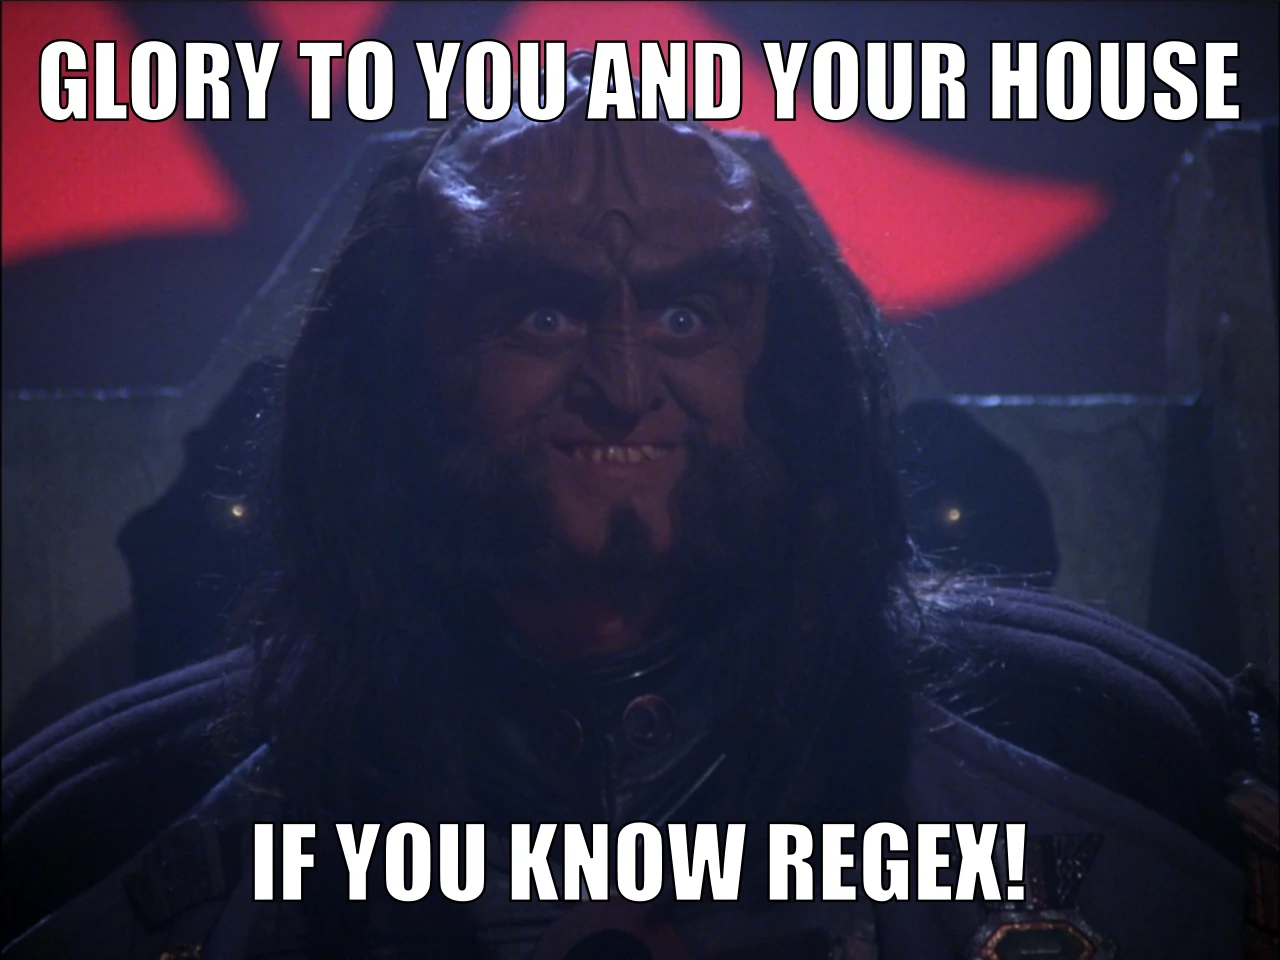 Star Trek TNG Gowron Meme - Glory to you and your house if you know regex!